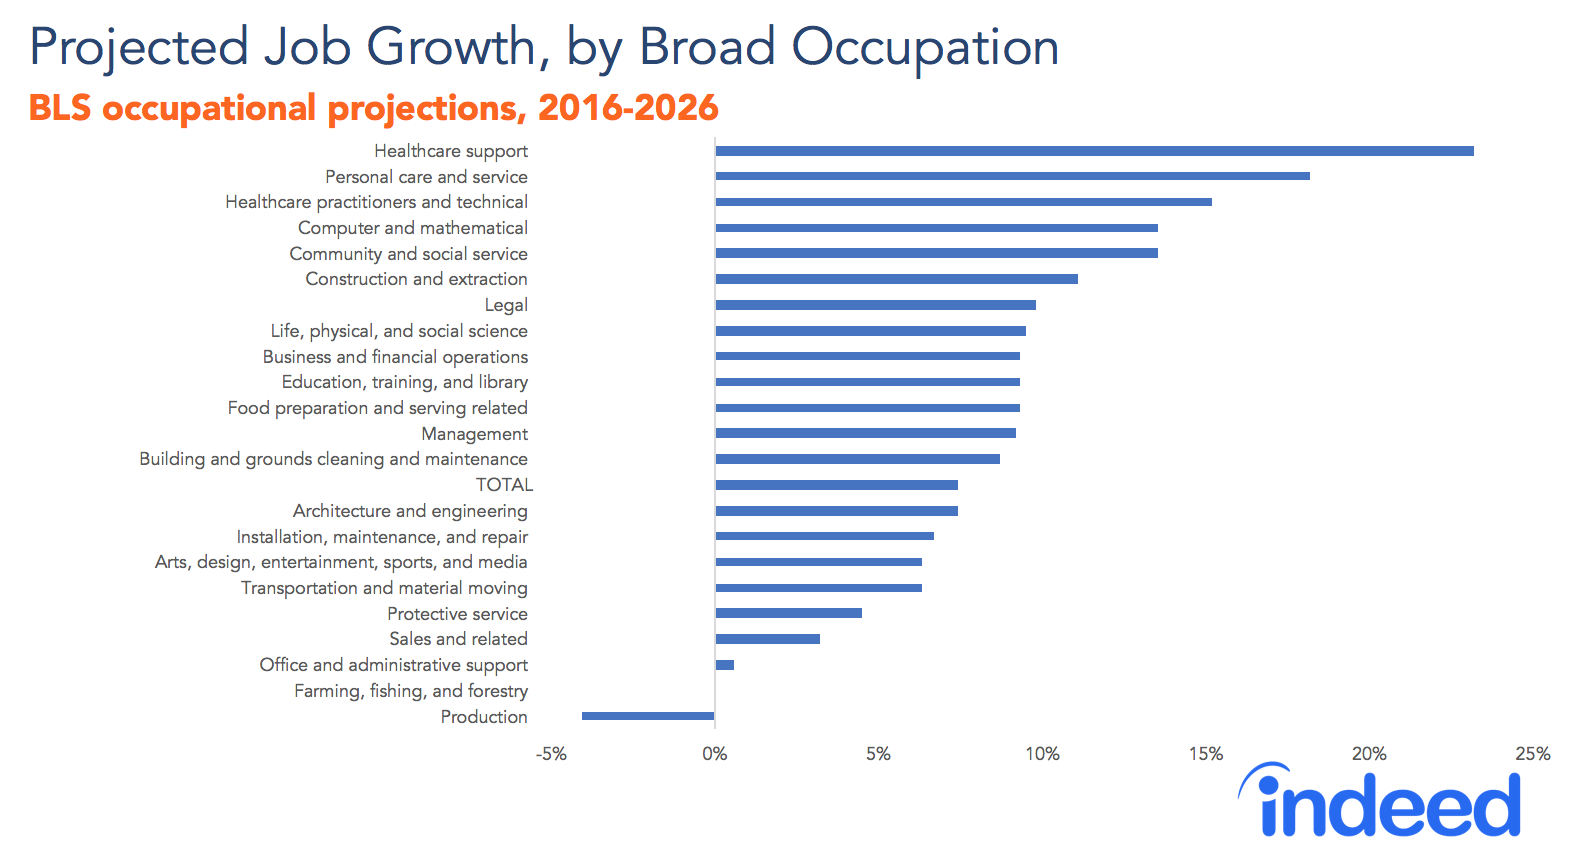 Projected job growth, by broad occupation